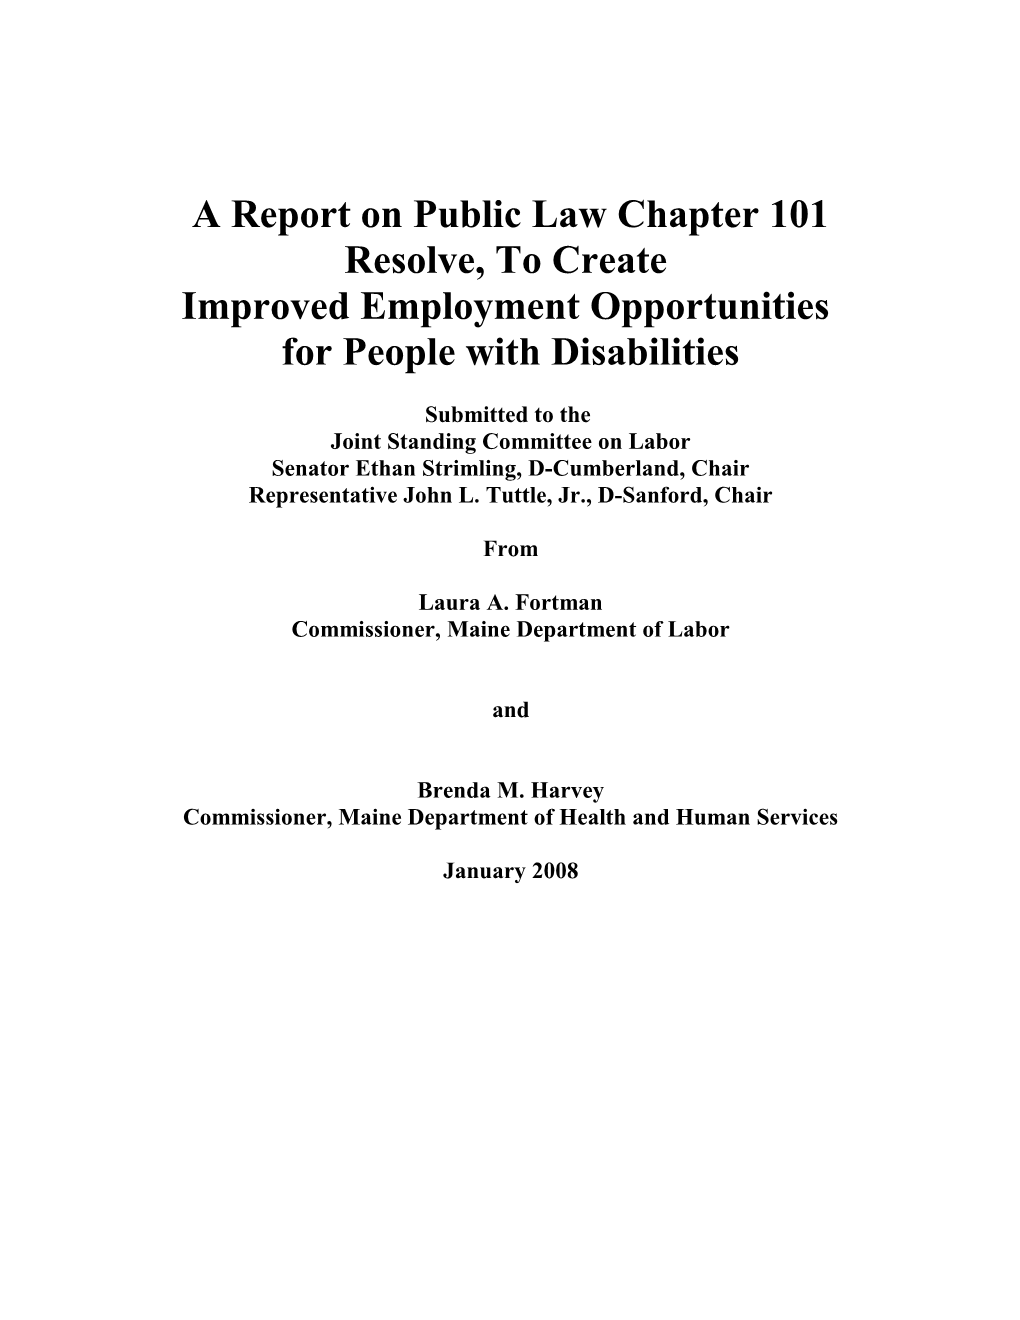 A Report on Public Law Chapter 101 Resolve, to Create